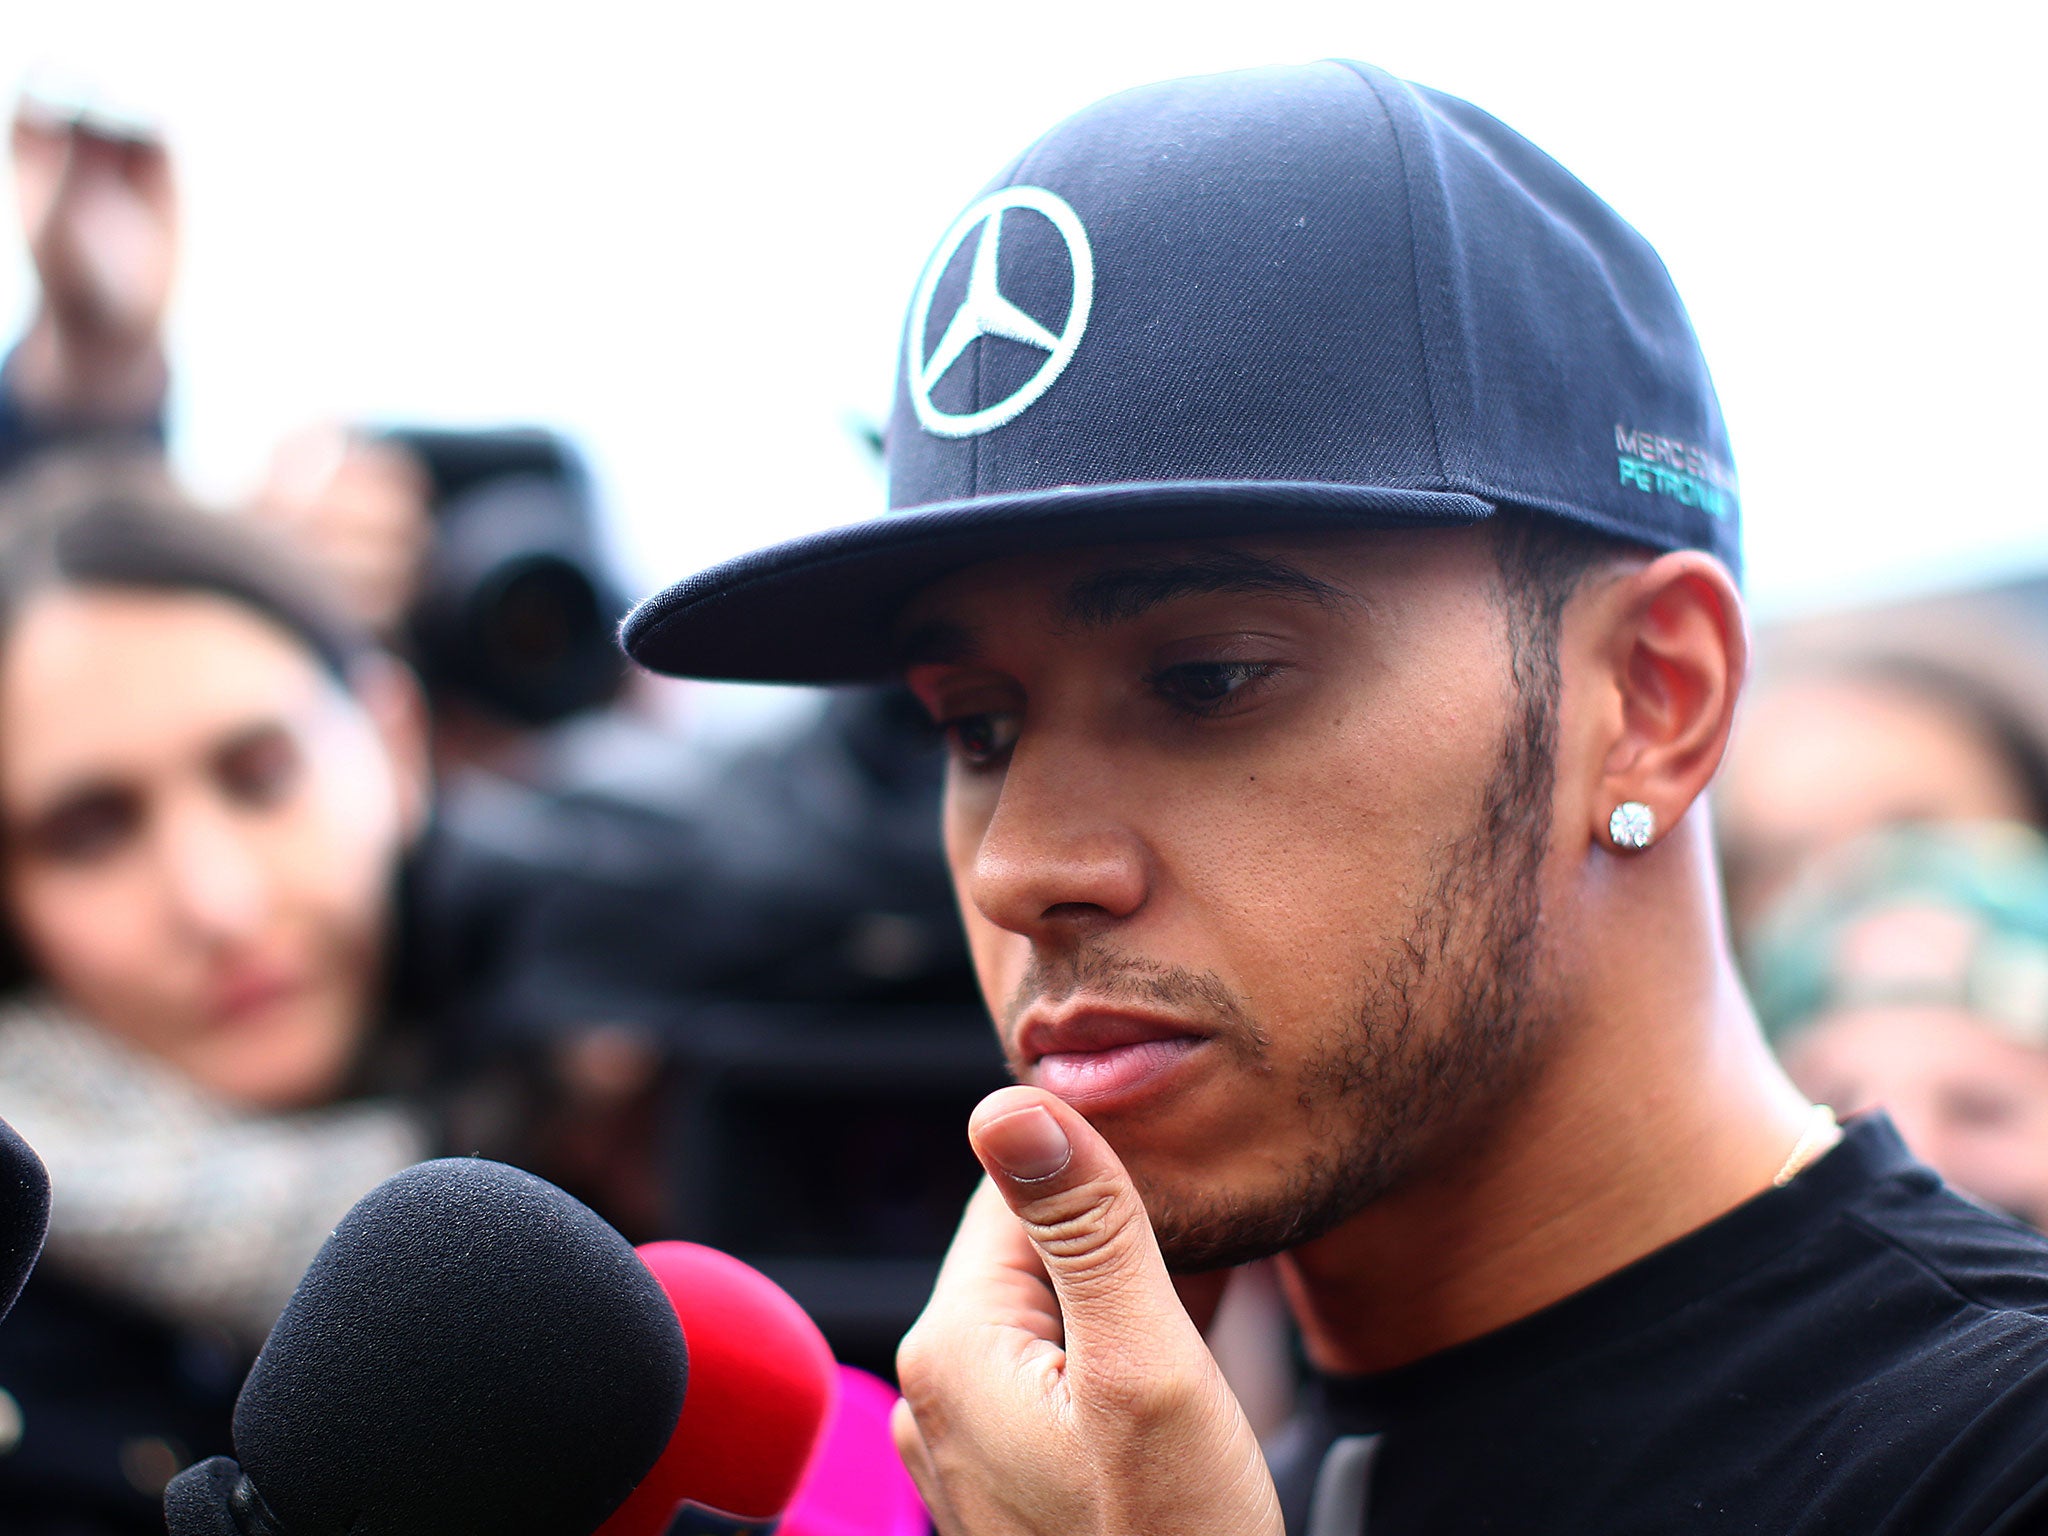 Lewis Hamilton is aiming to win a third world championship